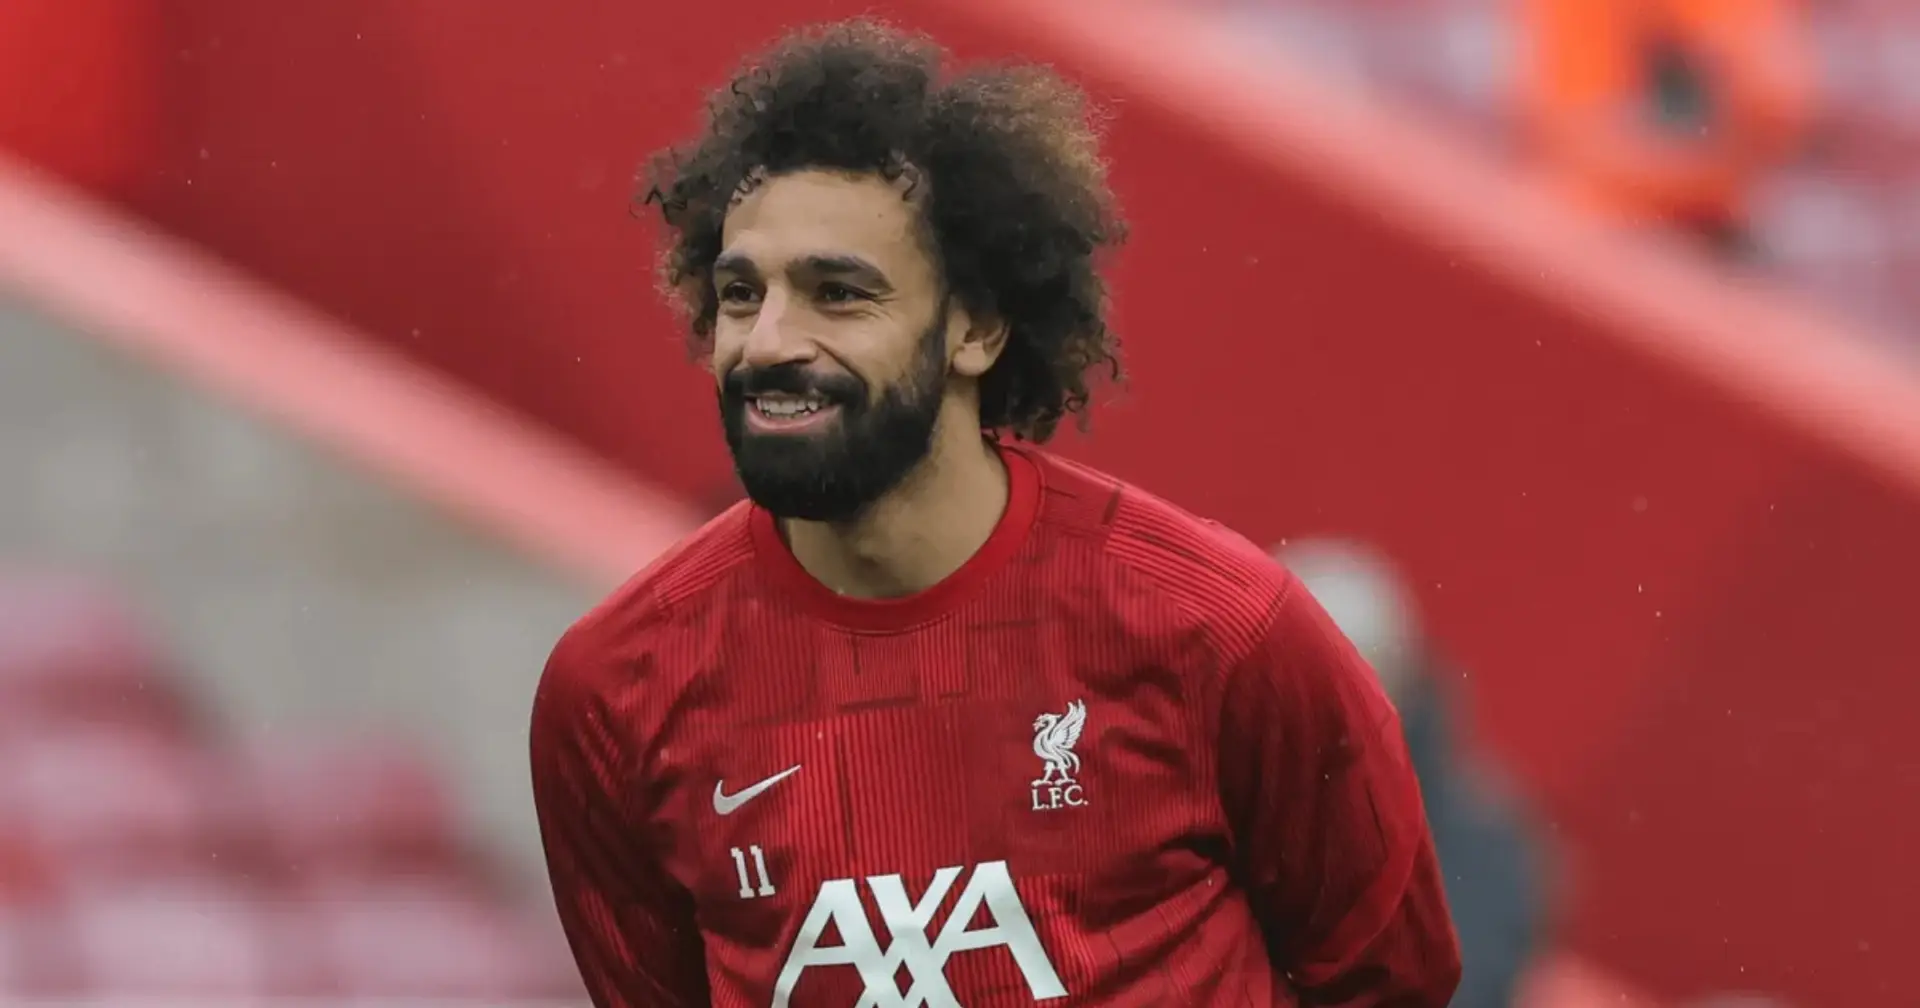 Mo Salah leaning towards new Liverpool deal & 3 more big stories you might've missed